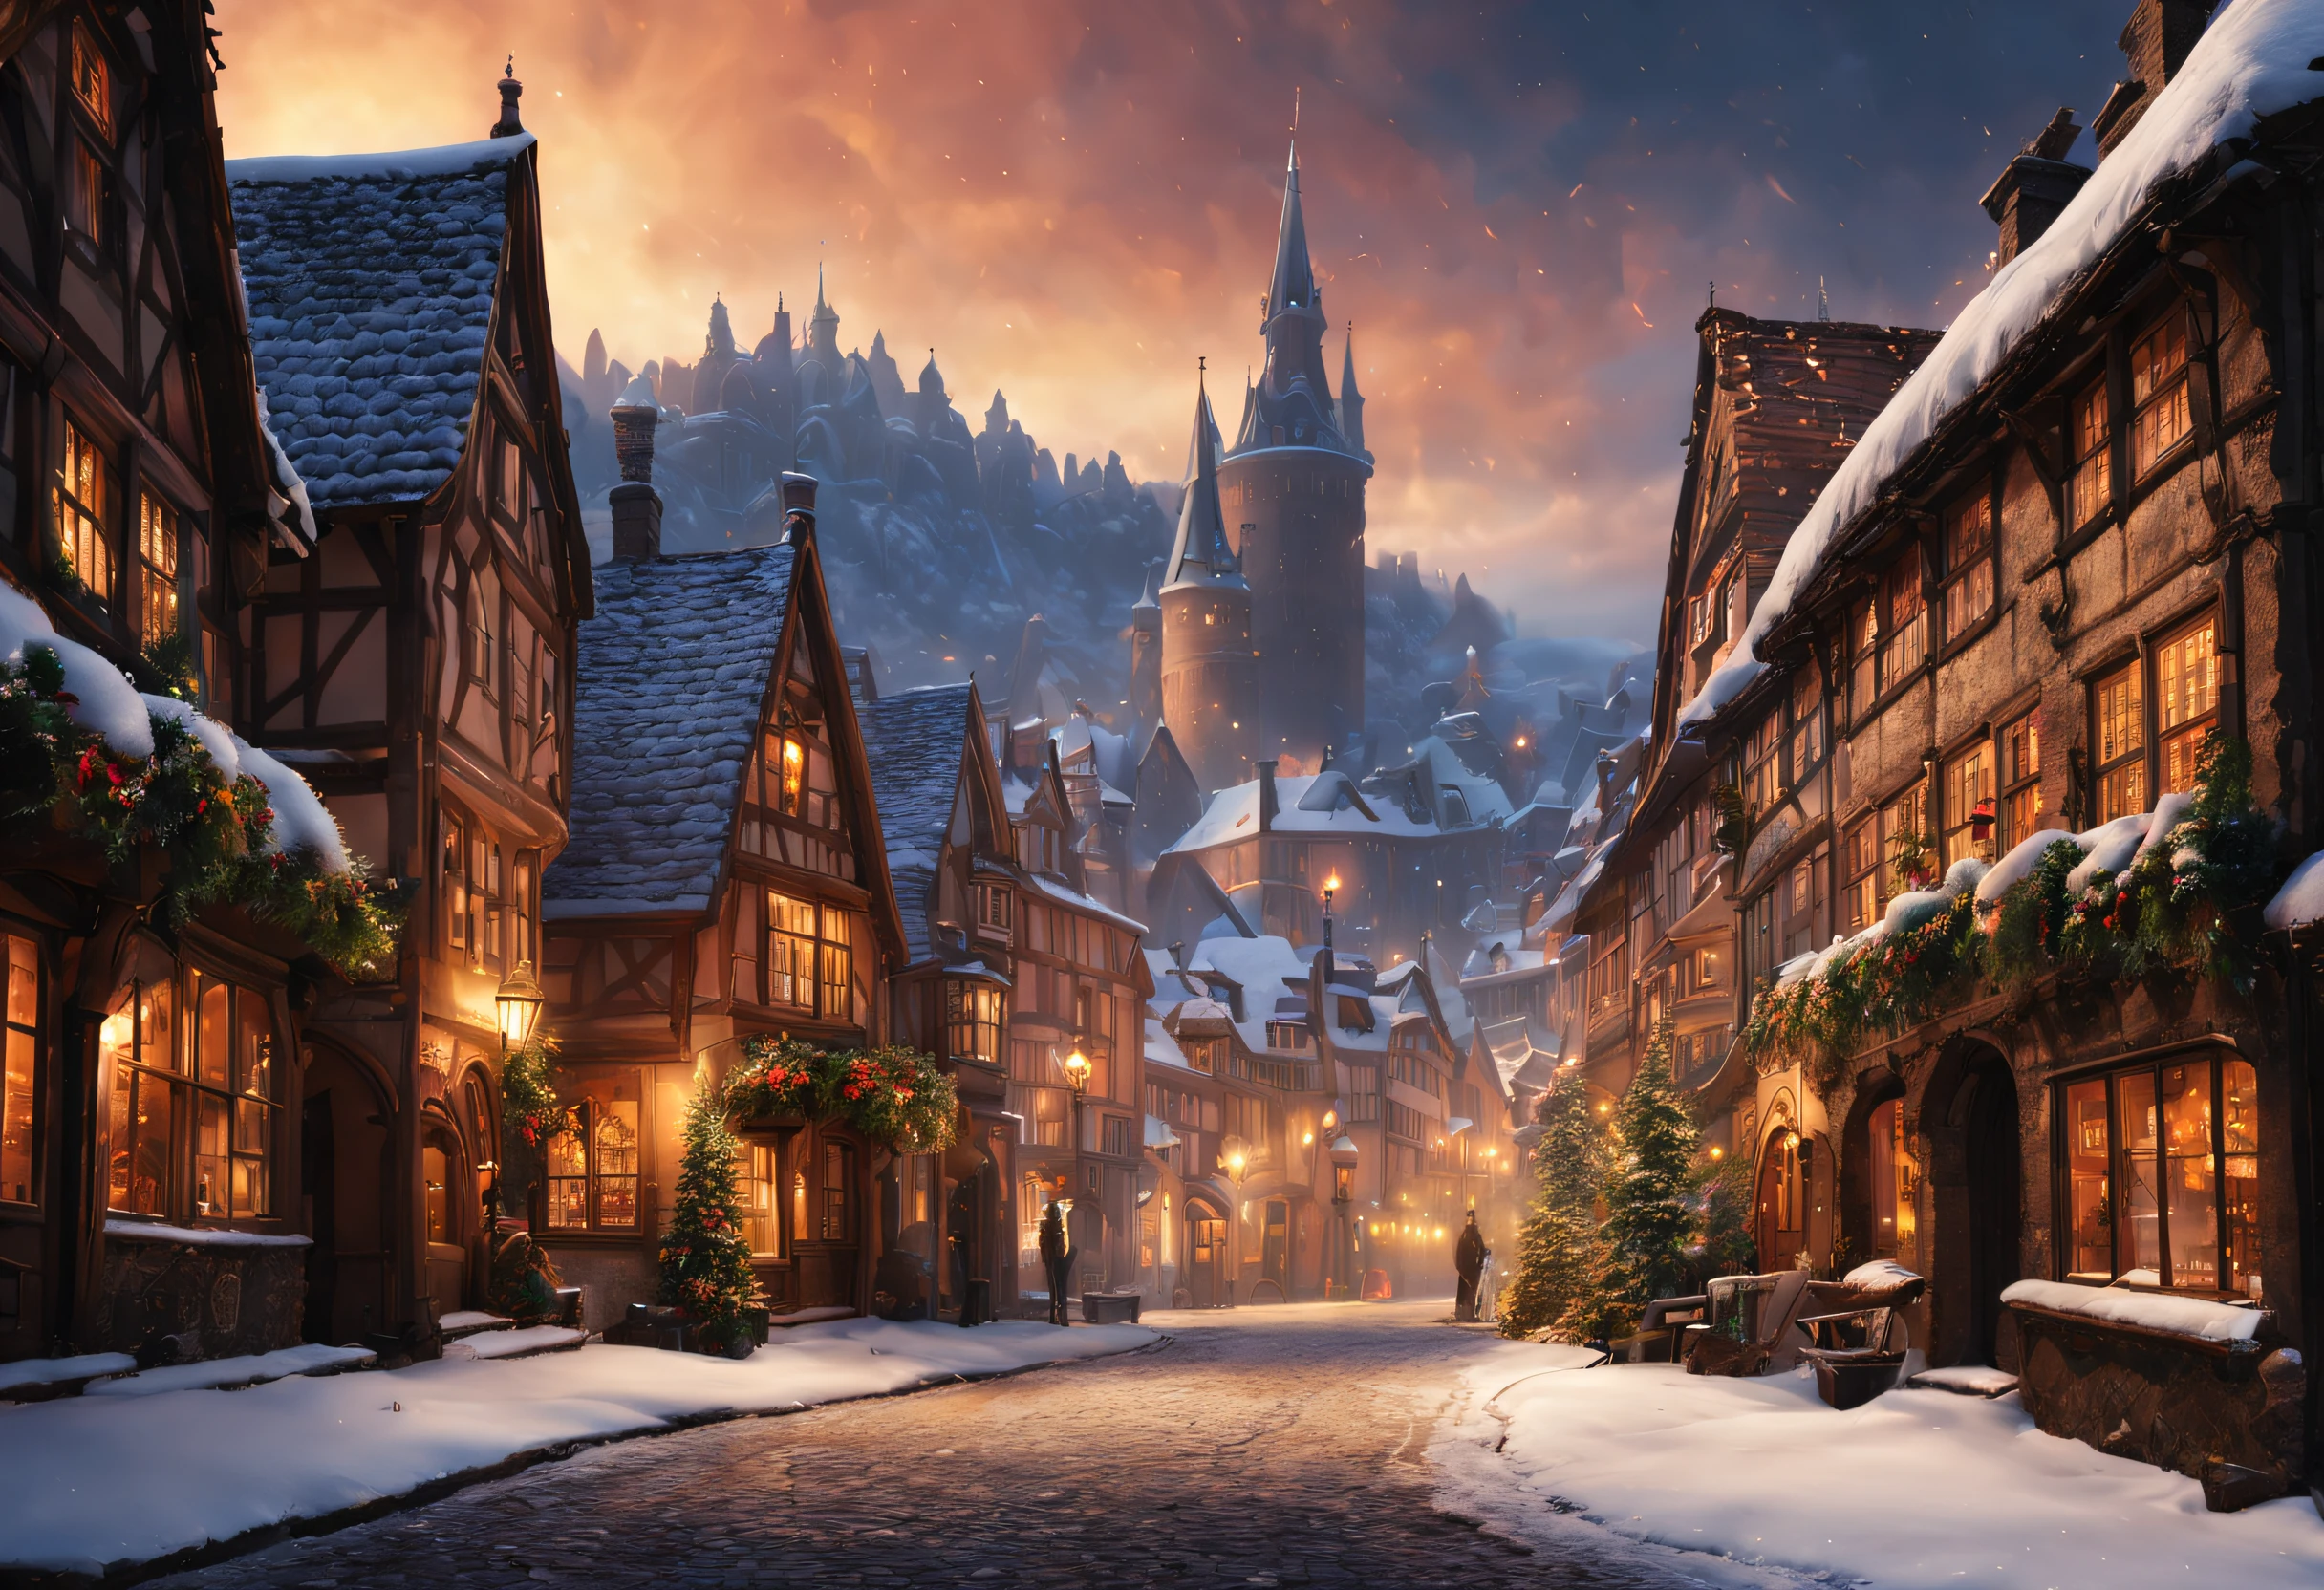 (best quality,4k,8k,highres,masterpiece:1.2),ultra-detailed,realistic, snowy medieval town, charming architecture, cobblestone streets, towering castle, smoke billowing from chimneys, icicles hanging from rooftops, snow-covered fir trees, flickering lanterns, snowflakes gently falling, cozy atmosphere, historical charm, dimly lit alleys, warm glow of fireplaces, horse-drawn carriages passing by, distant sound of bells, hints of a bustling marketplace, cloaked figures walking through snow, peaceful and magical ambiance, vibrant colors peeking through the snow, postcard-worthy scenery, serene winter landscape